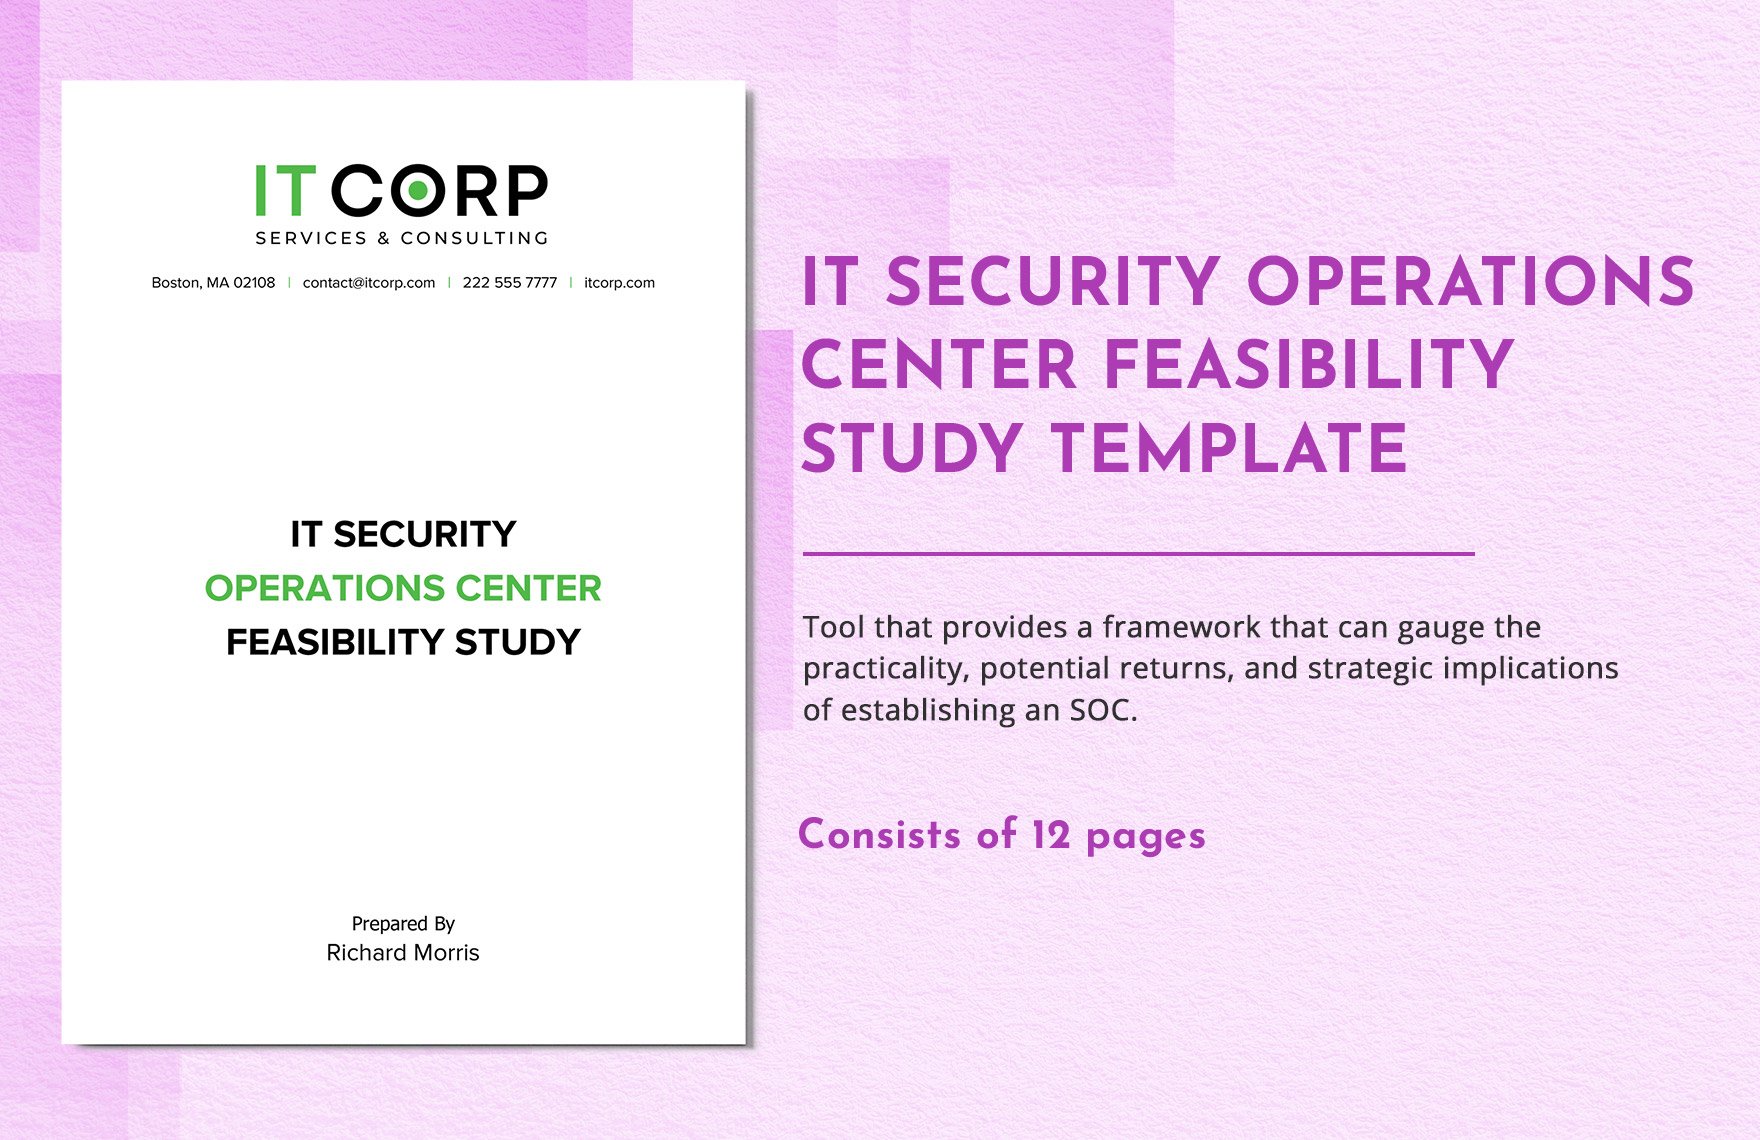 IT Security Operations Center Feasibility Study Template